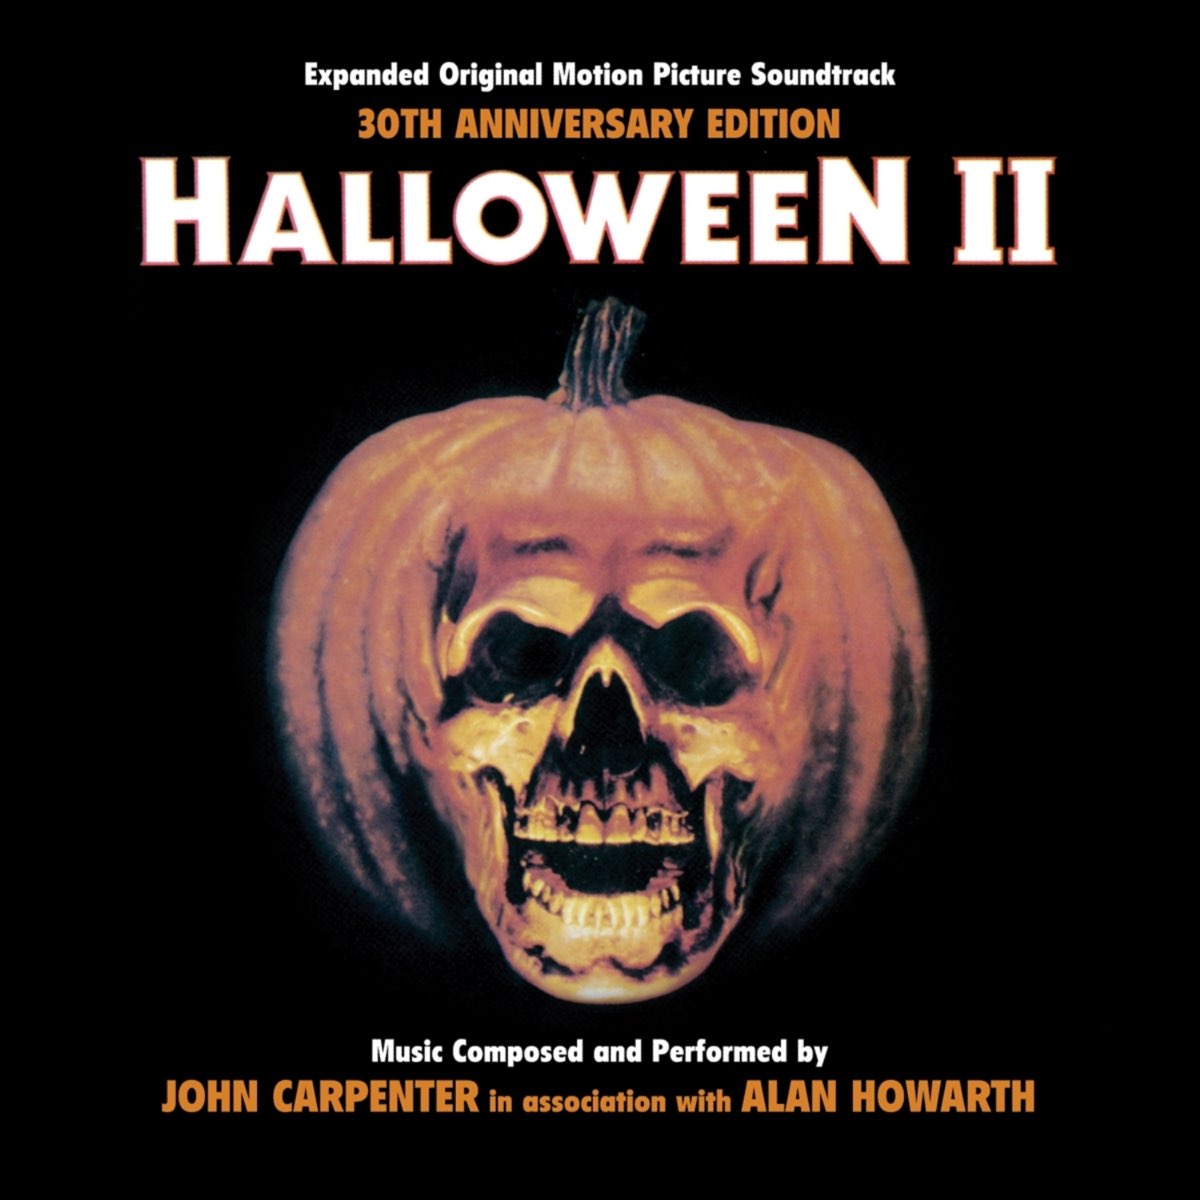 ‎Halloween II (Expanded Original Motion Picture Soundtrack) [30th